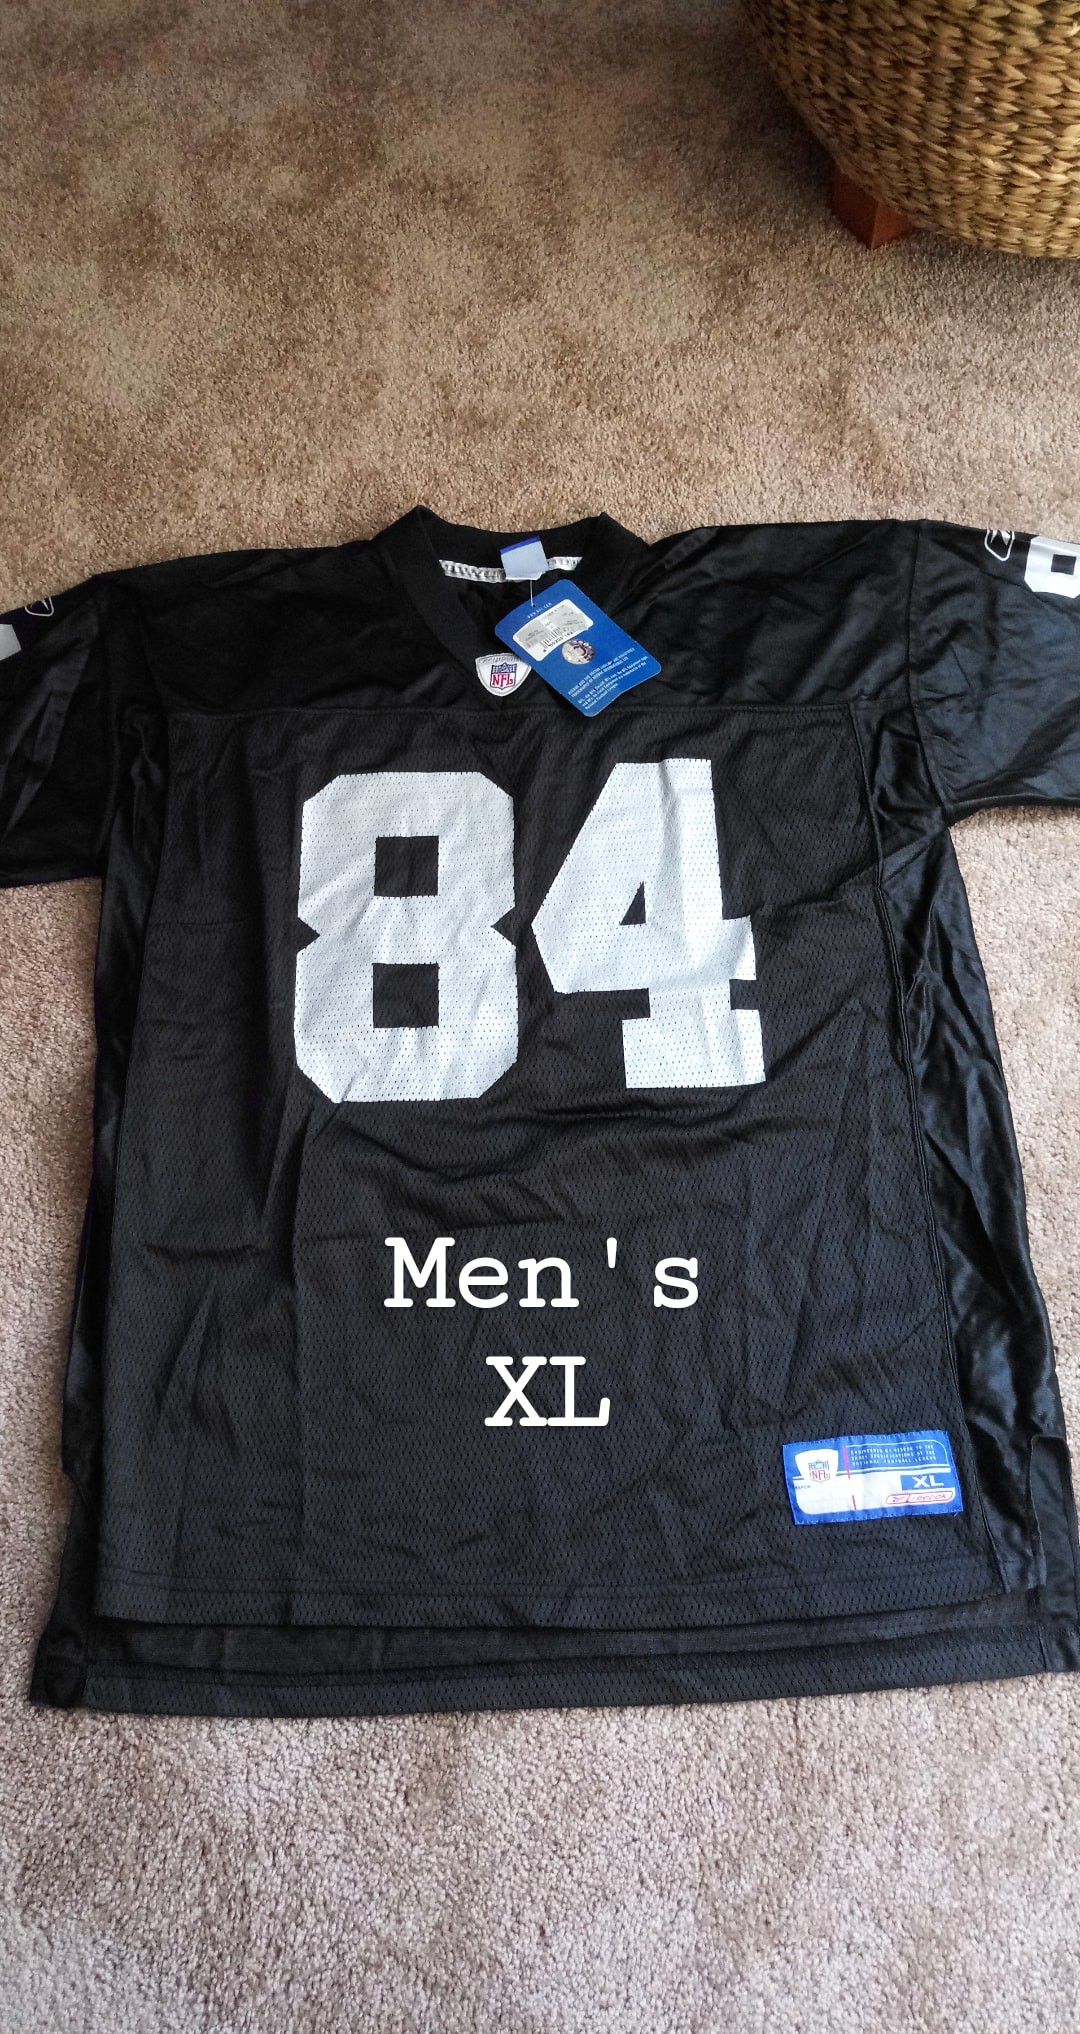 NFL Raiders men's extra large Jersey